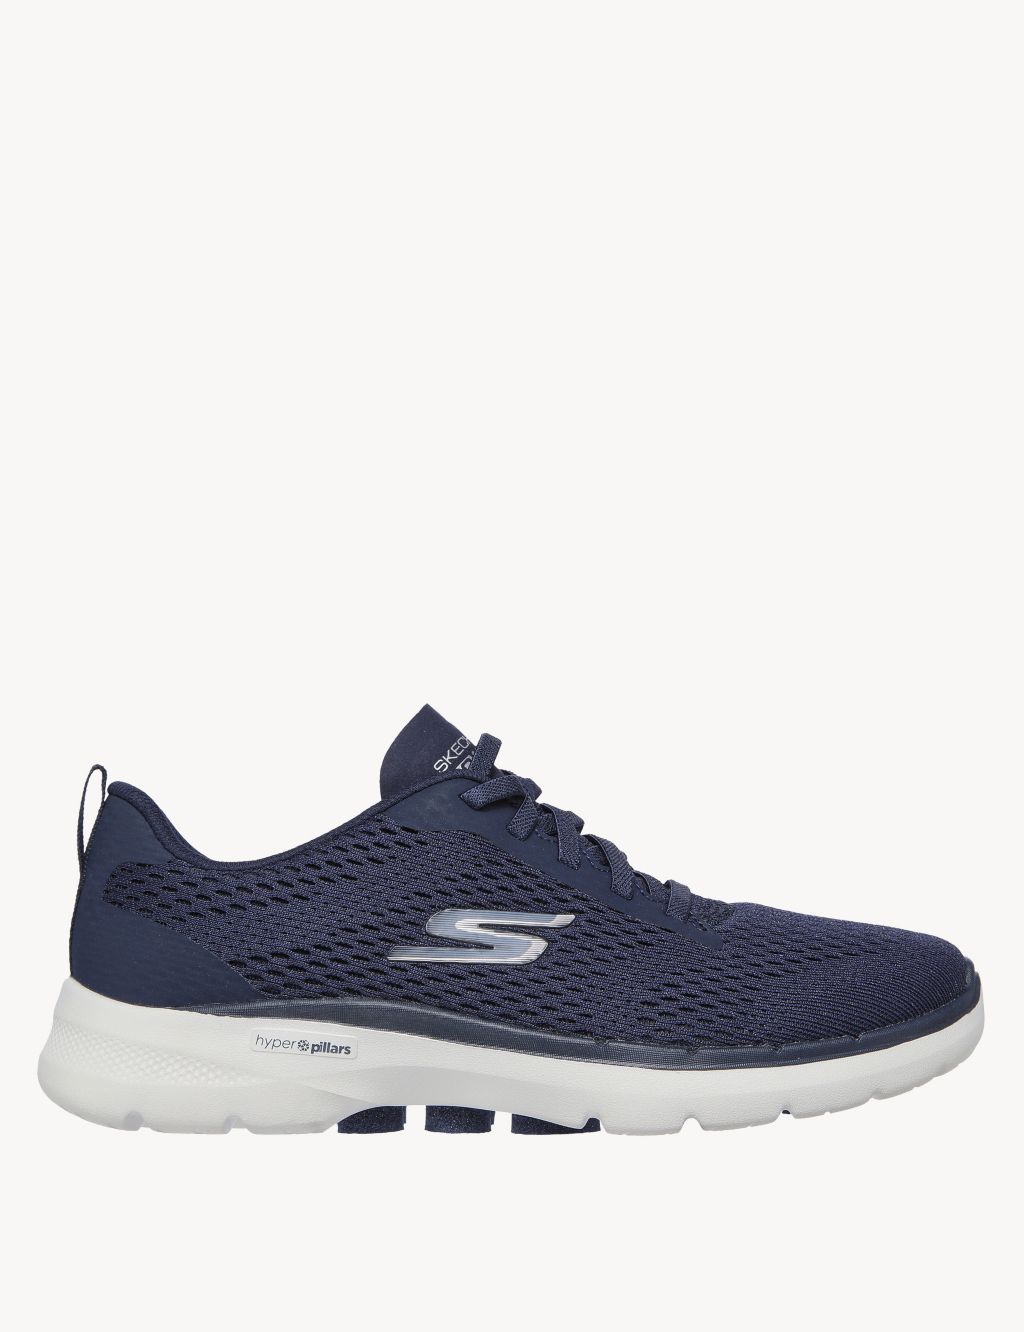 GOwalk 6 Bold Vision Lace Up Trainers | Skechers | M&S